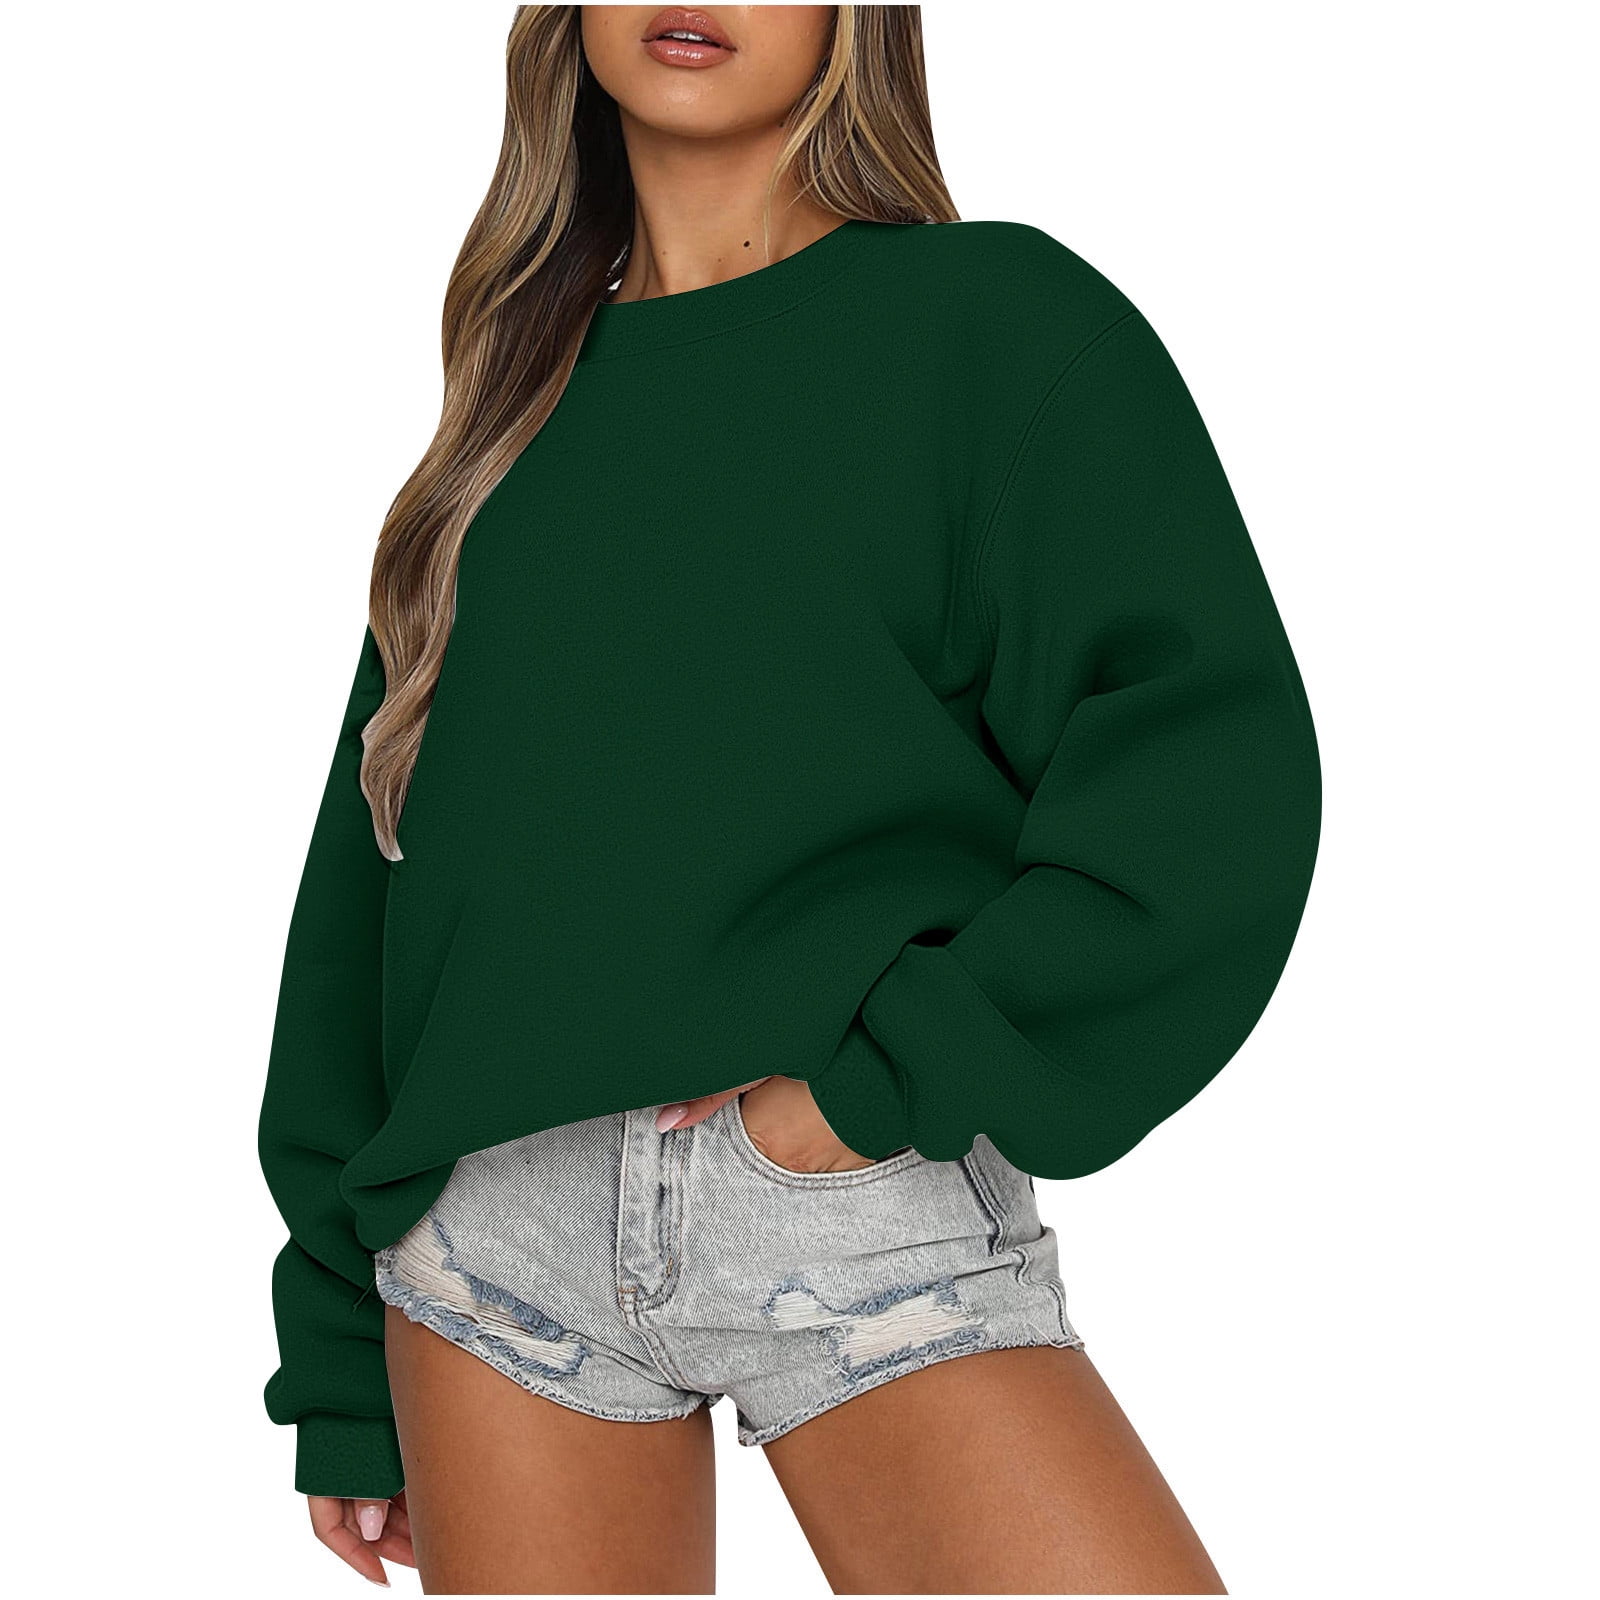 YYDGH Oversized Sweatshirt for Women Fleece Long Sleeve Crewneck Casual  Pullover Hoodie Tops Fall Y2K Trendy Clothes Light Blue S